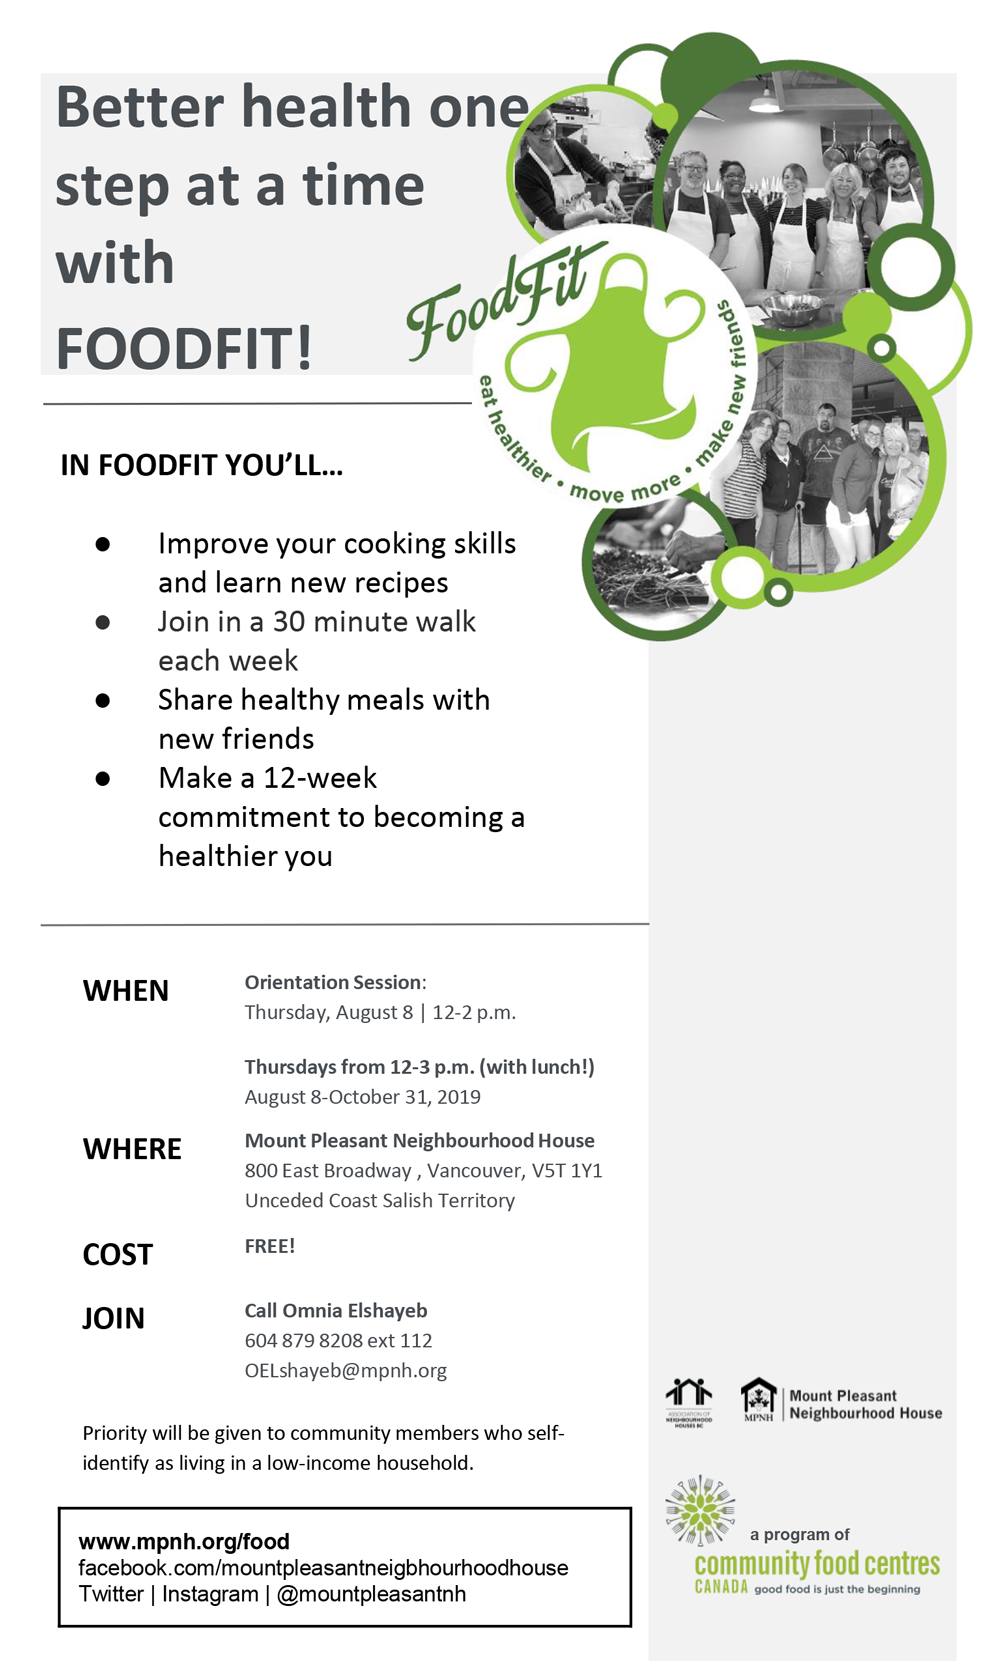 An image of the poster with program details, featuring black and white photos of people walking and cooking together.